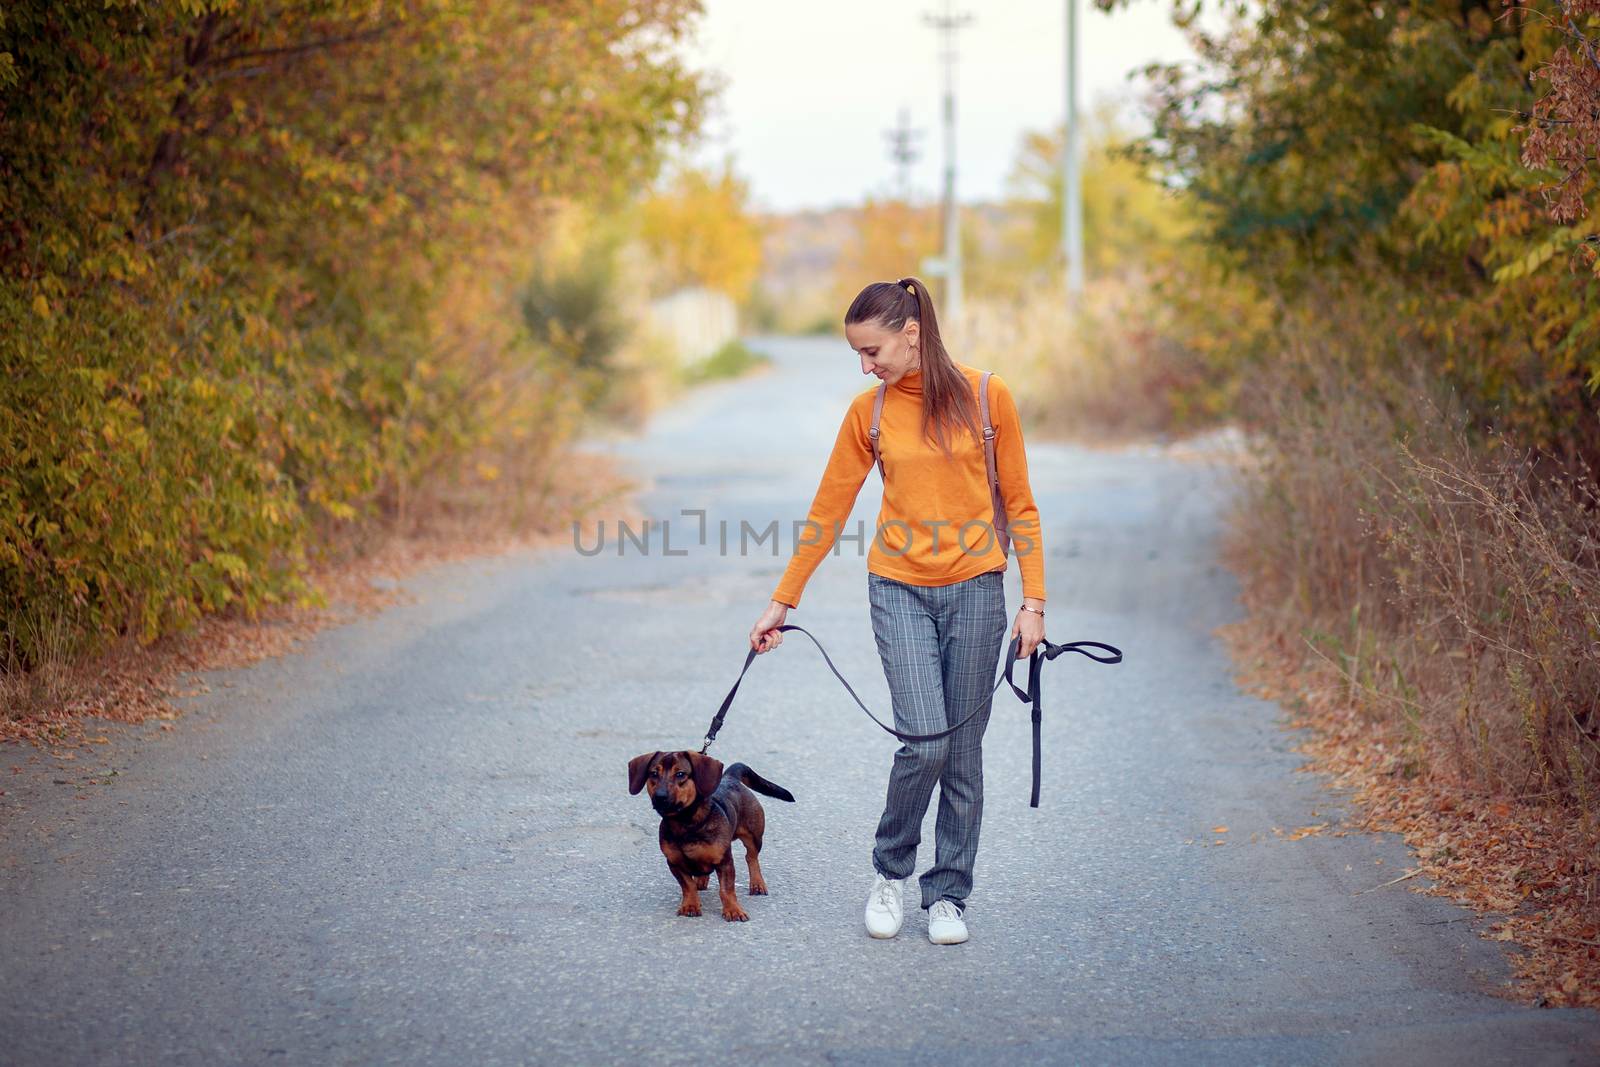 Young woman in an orange turtleneck and jeans walks with a dog on a leash in an autumn park